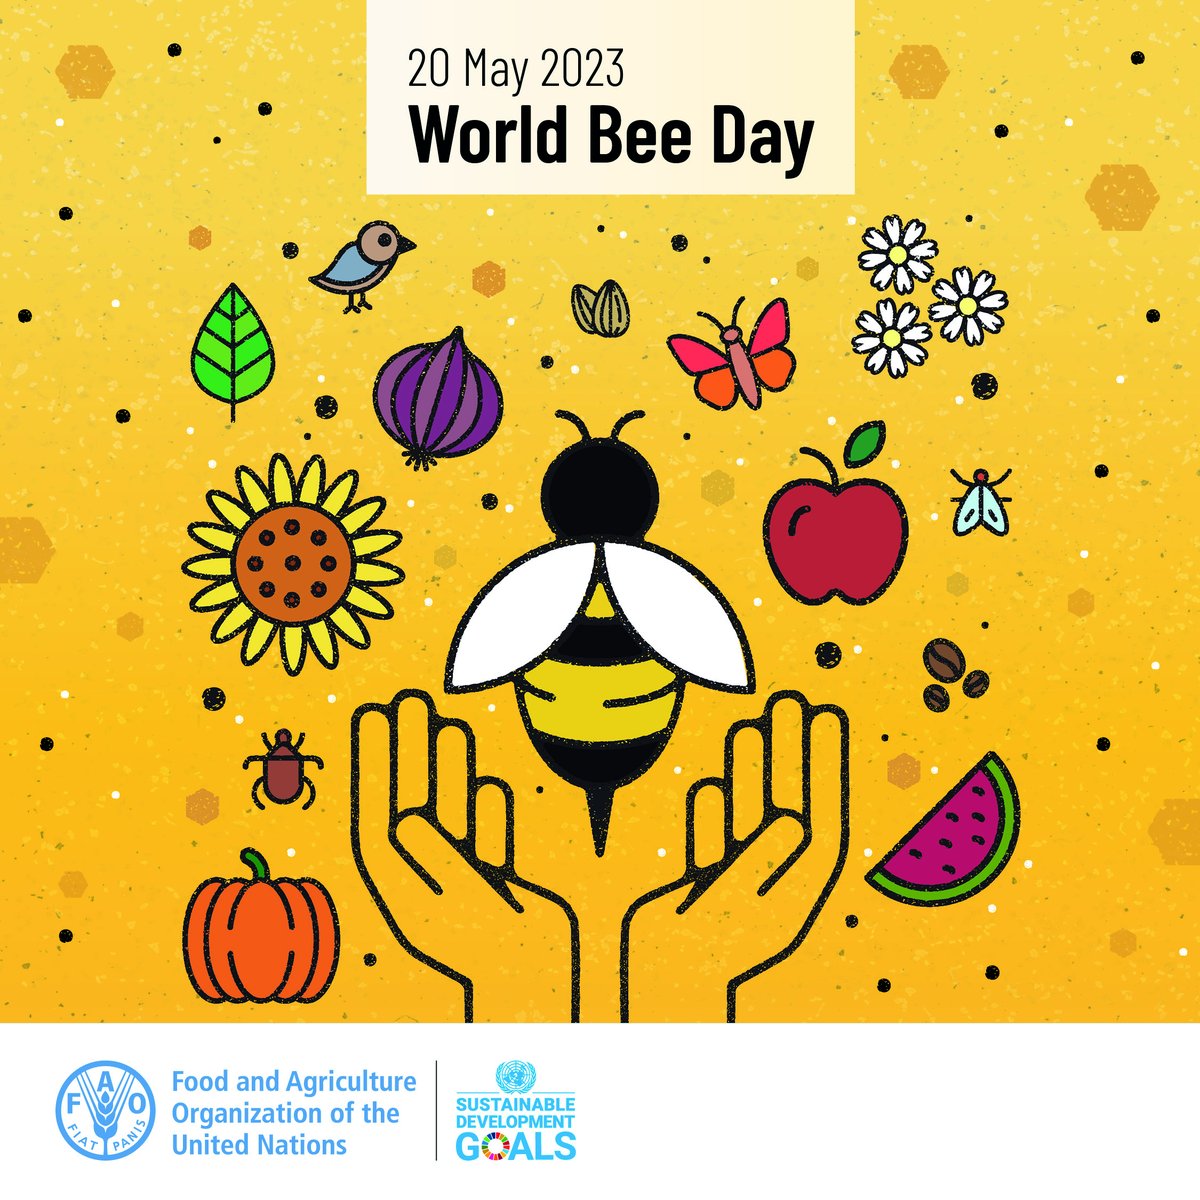 📢 #SavetheDate | 2023 World Bee Day hybrid event

Join us this #WorldBeeDay to celebrate our tiny #FoodHeroes & explore how we can promote pollinator-friendly agricultural production!

🗓️ Friday 19 May
⏰10.00 - 11.30 CEST
📝Register here 👉bit.ly/3pktcqX

#BeeEngaged